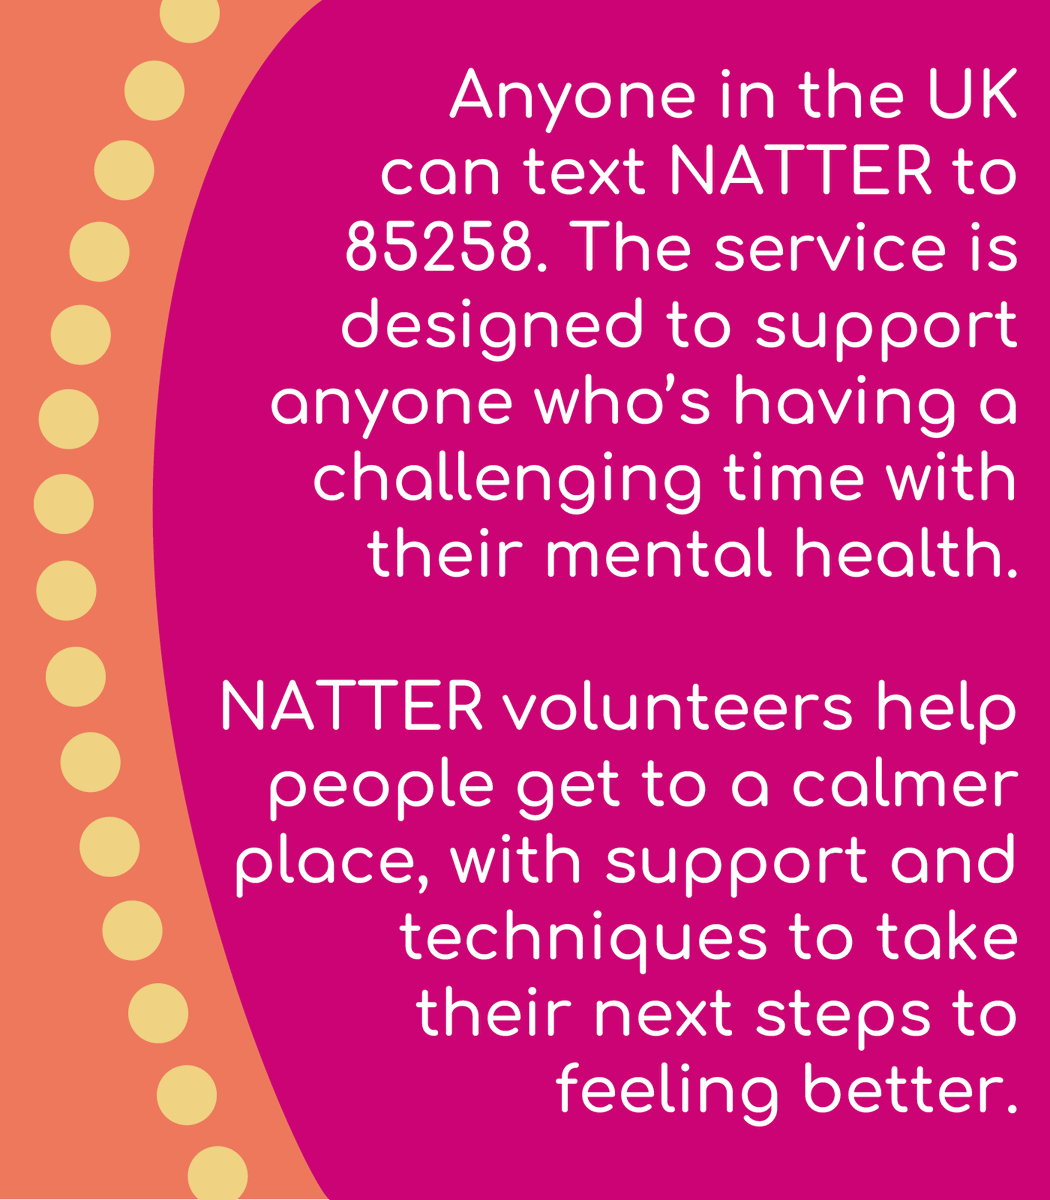 We want to reassure young people that NATTER is open to everyone, with no age limits or assessment criteria. Thanks to our text service (run in partnership with @GiveUsAShout), young people can access support 24/7. Find out more about NATTER: bit.ly/TextNATTER